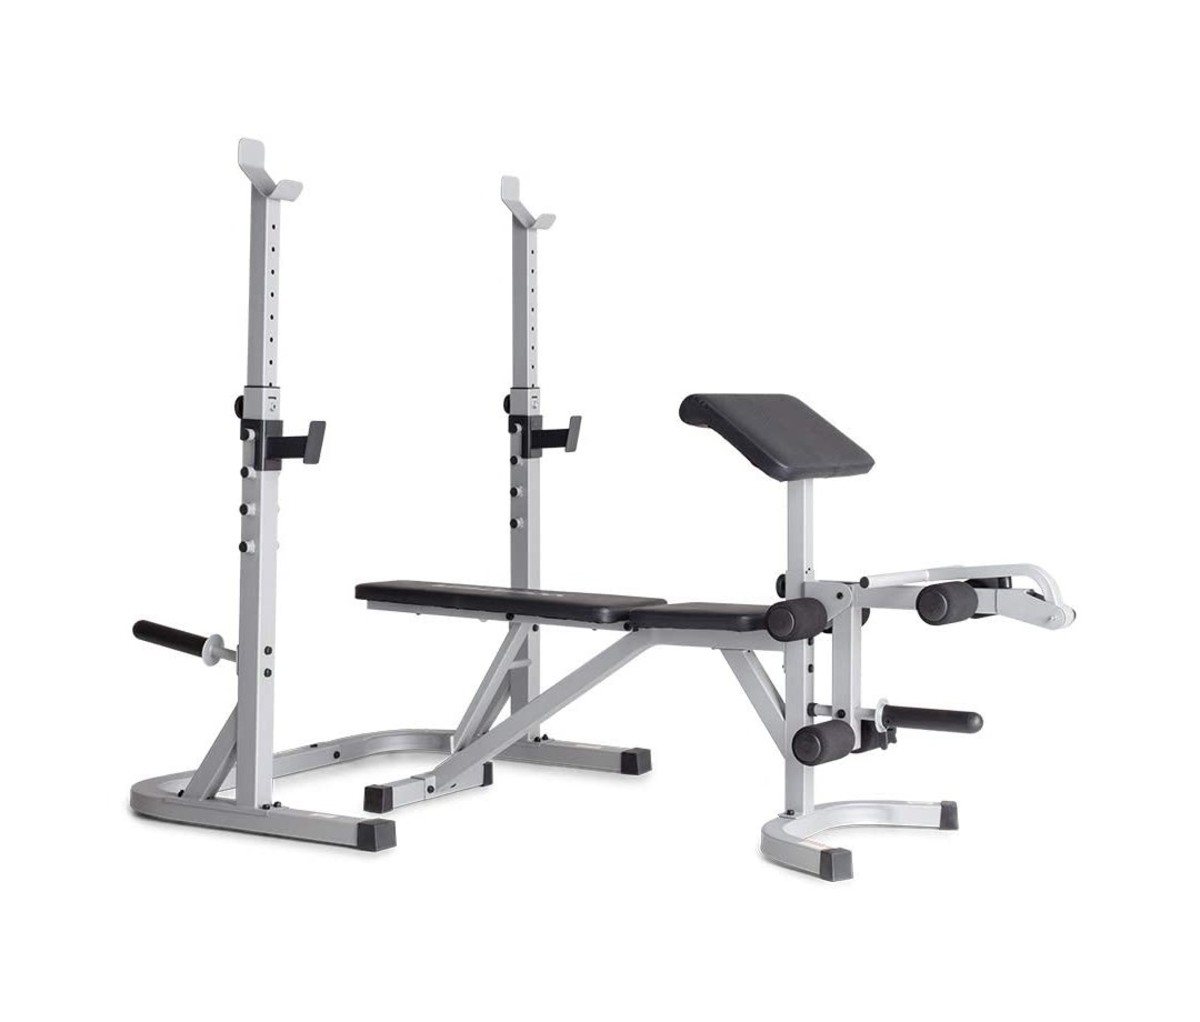 12 Best Weight Benches for Every Home Gym | Men's Journal - Men's Journal